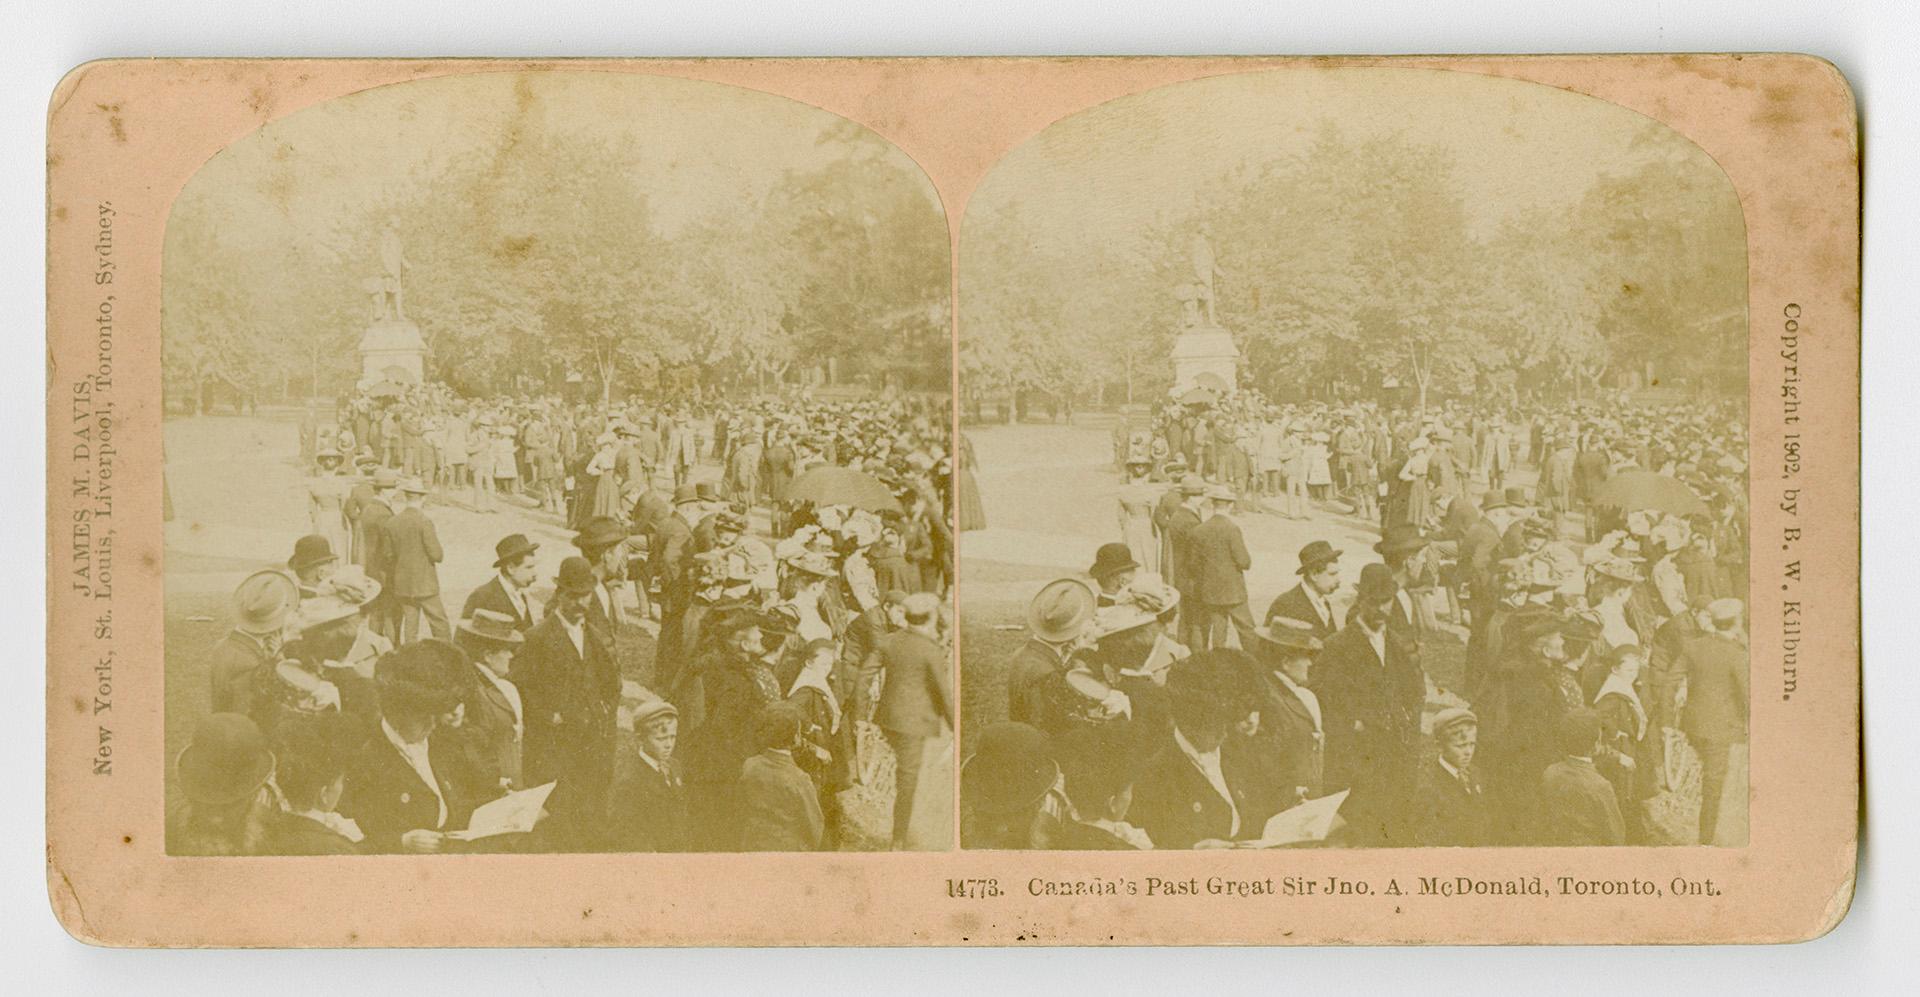 Pictures show a huge crowd gathered around a monument in a park.